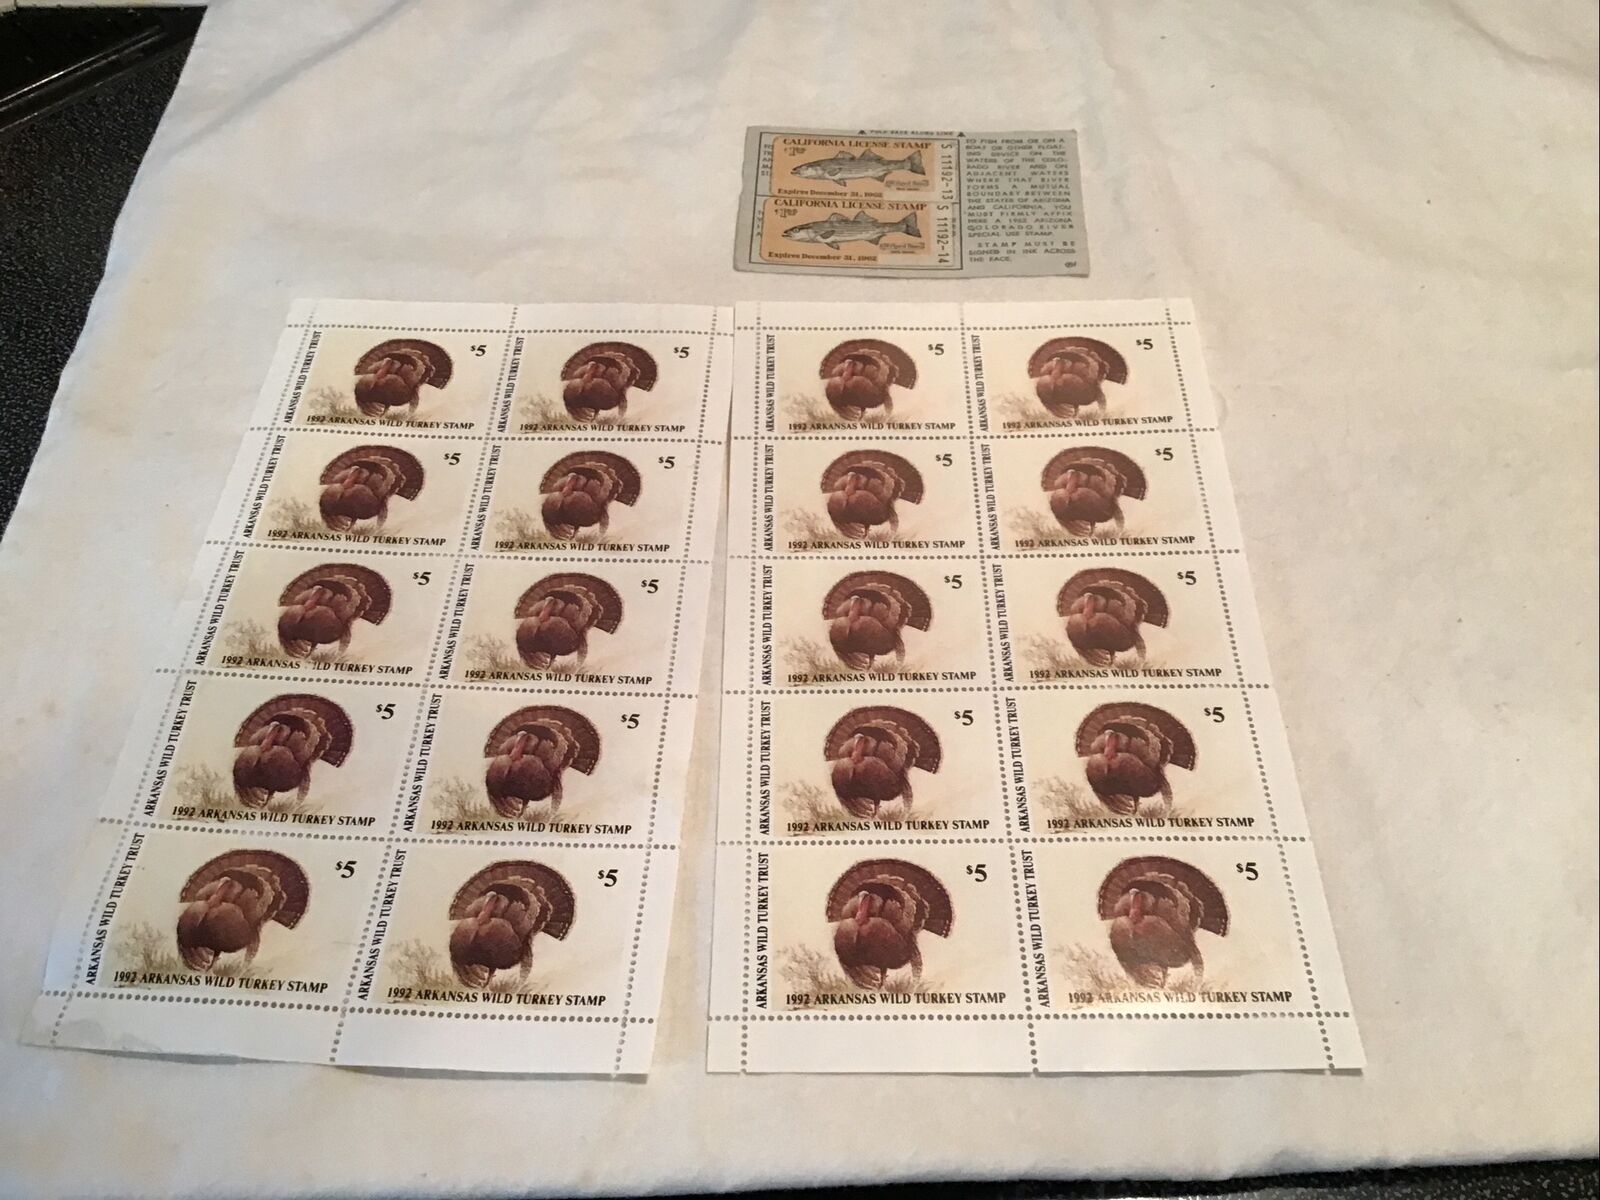 20 1992 Arkansas Wild Turkey Stamps Not Used & 2 , 1962 California Trout Stamps